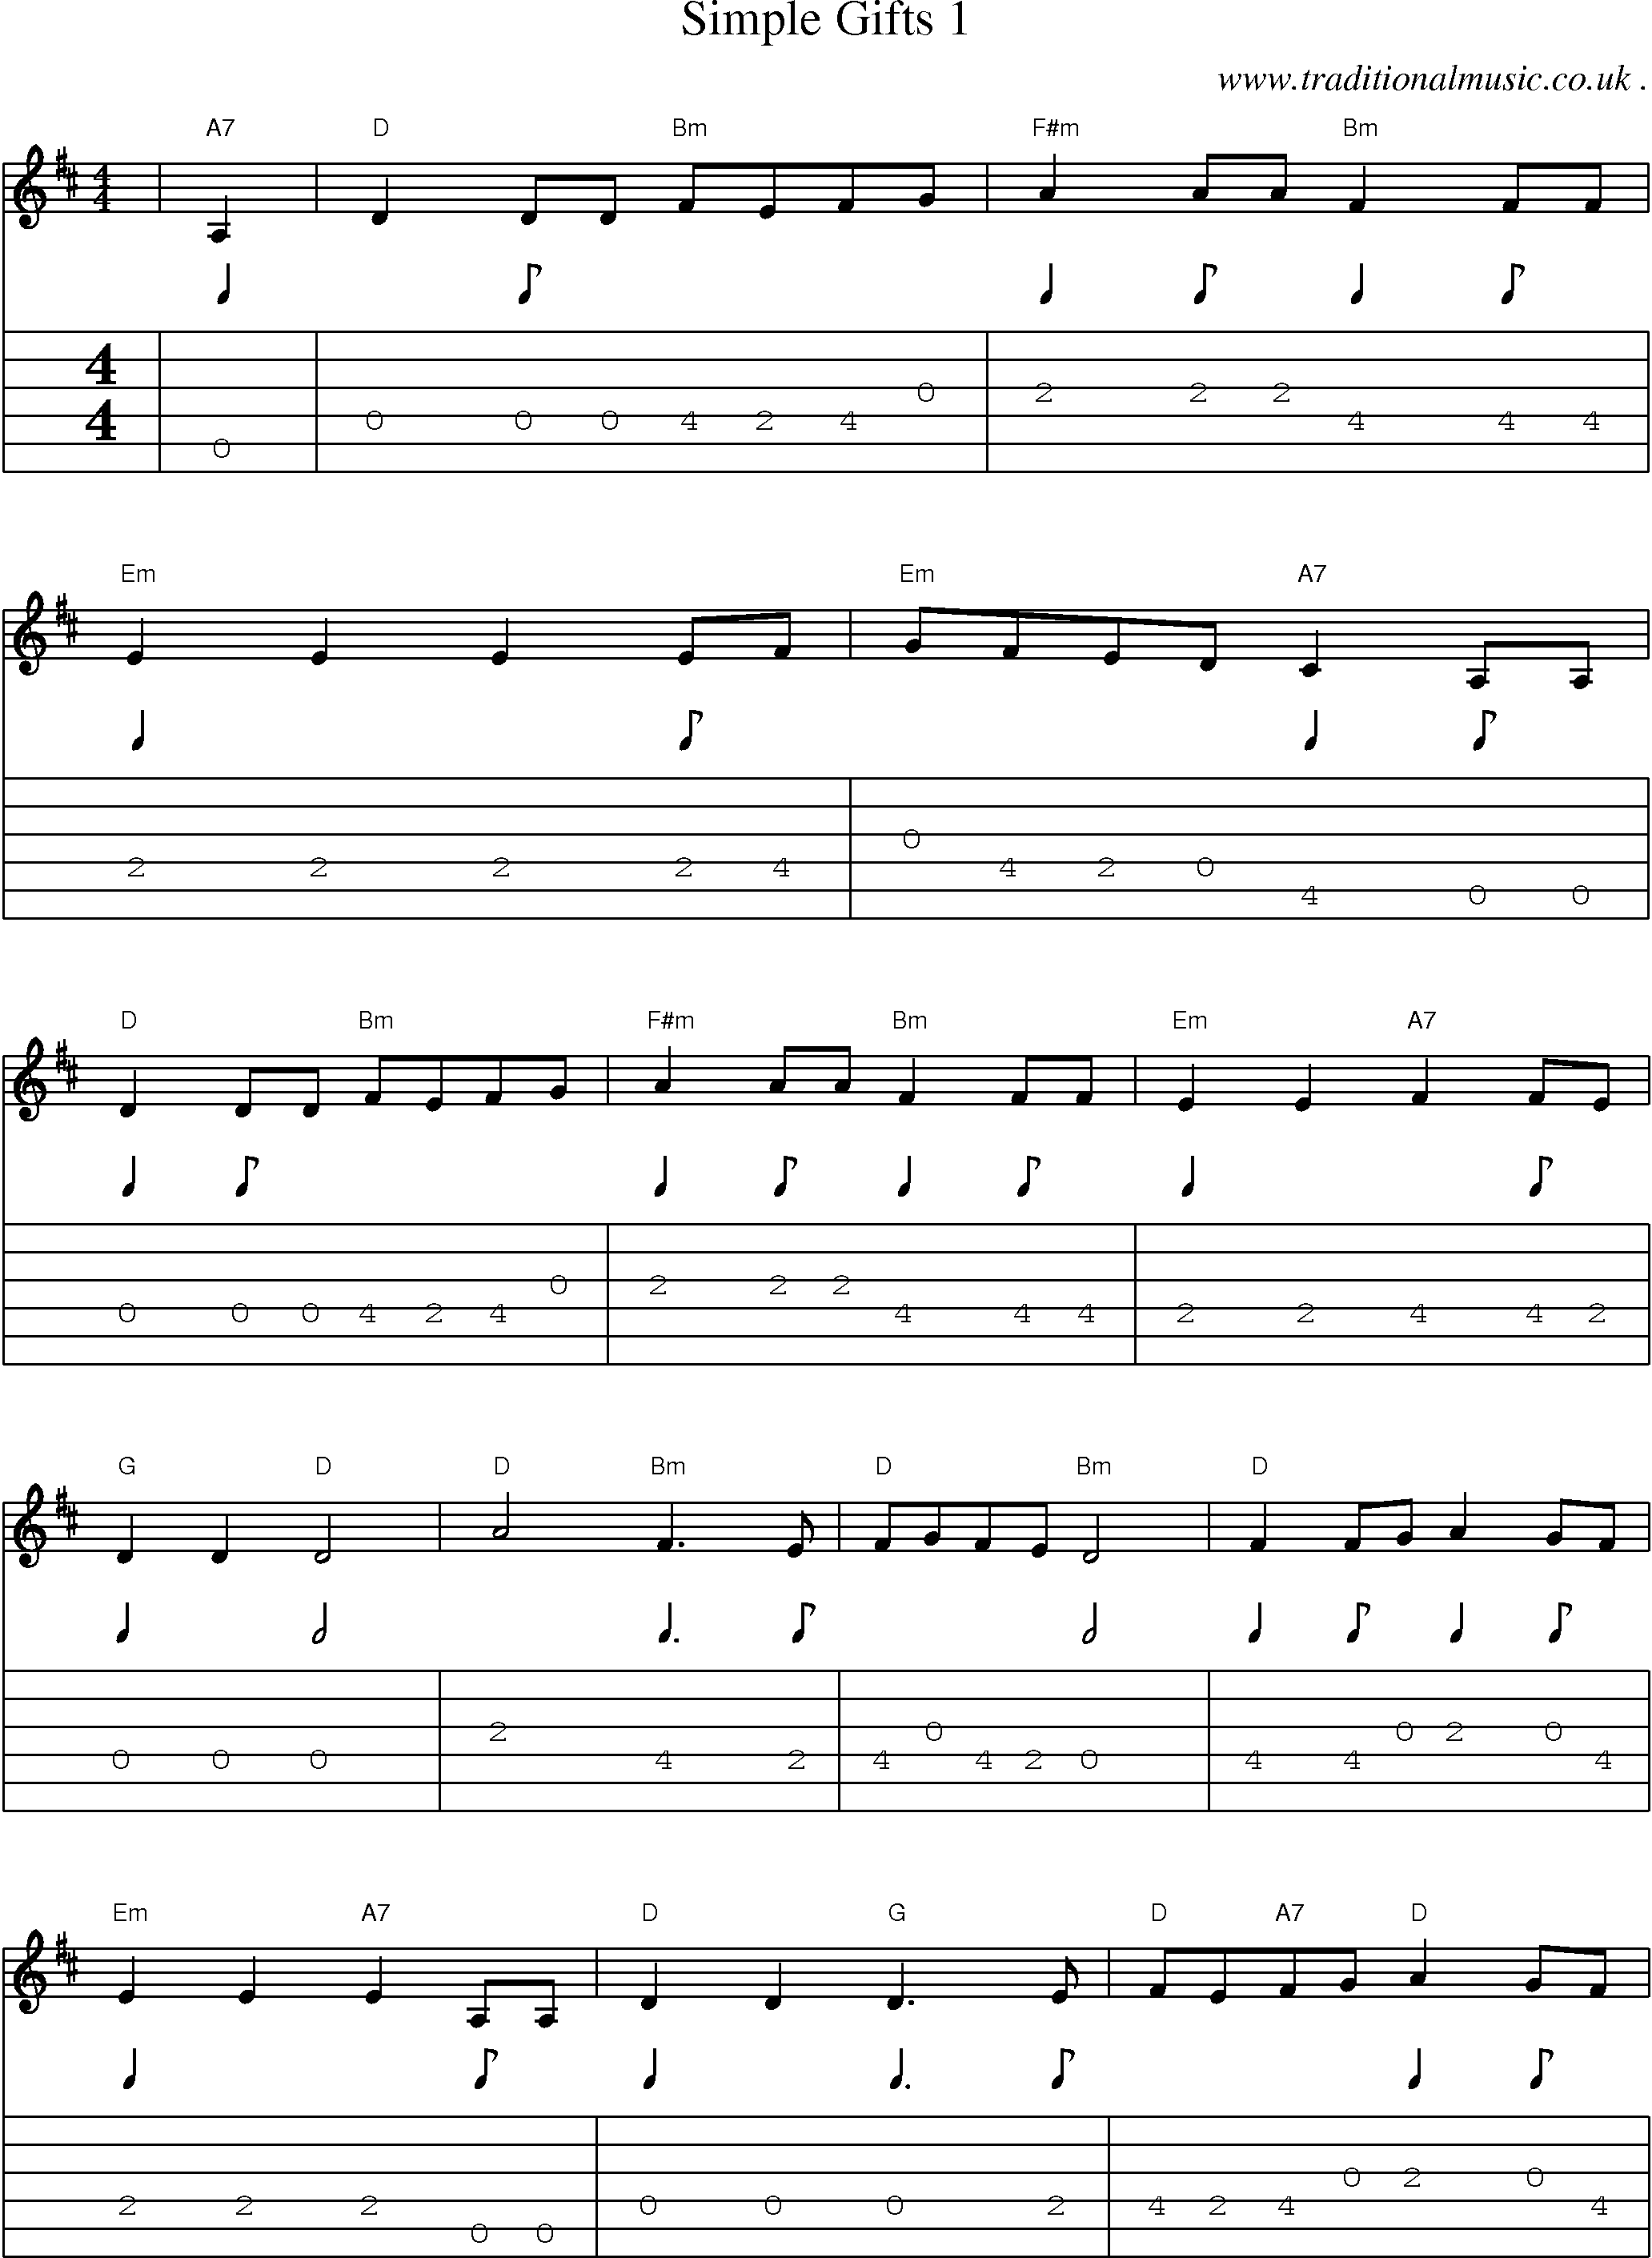 Music Score and Guitar Tabs for Simple Gifts 1